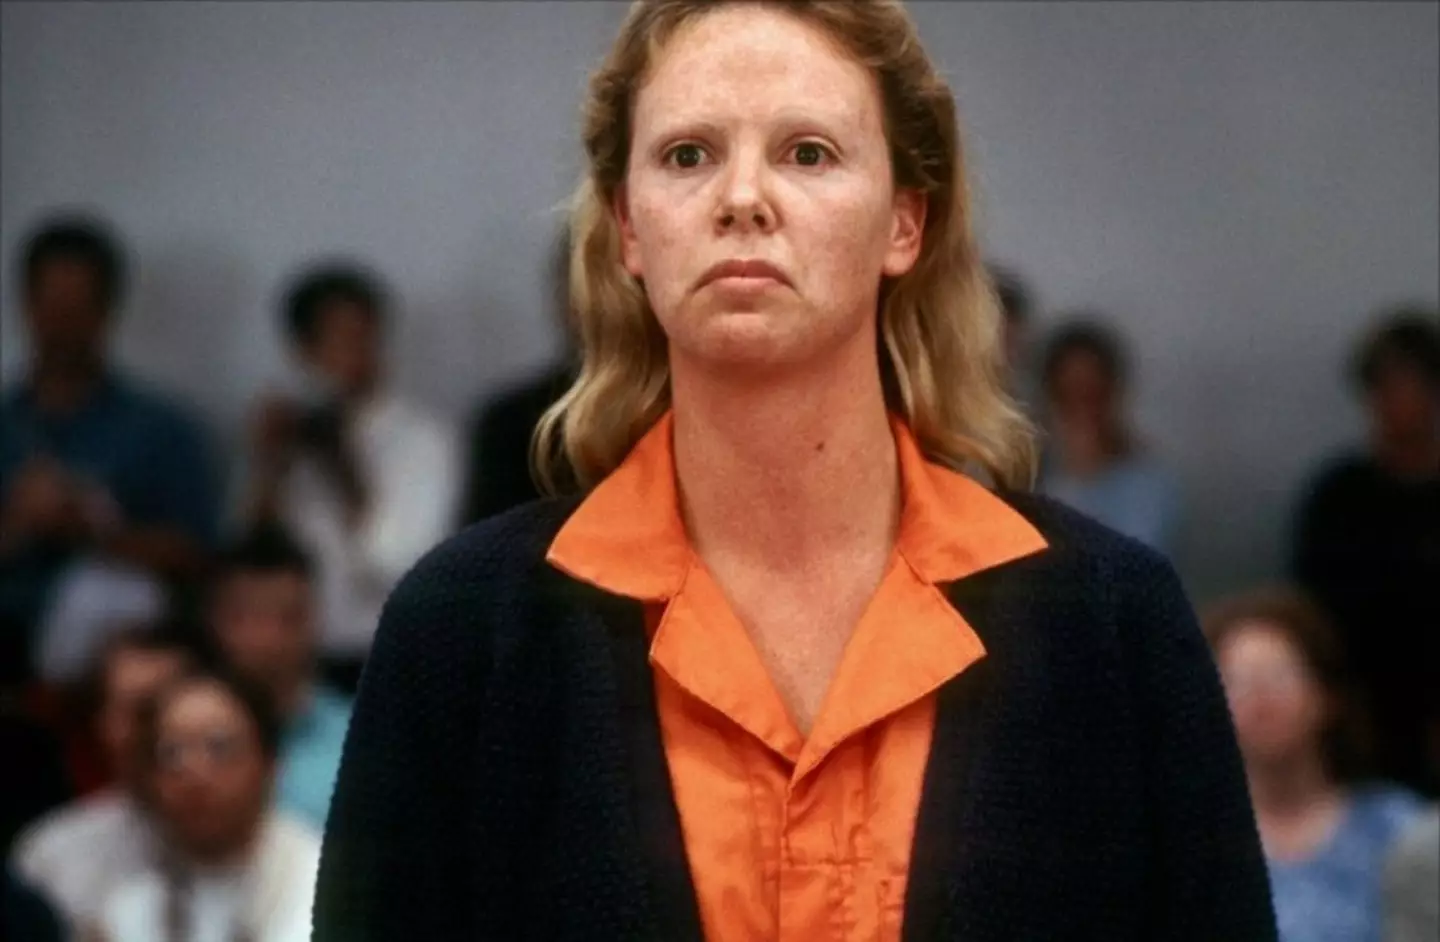 The star gained weight to play serial killer Aileen Wuornos in Monster.